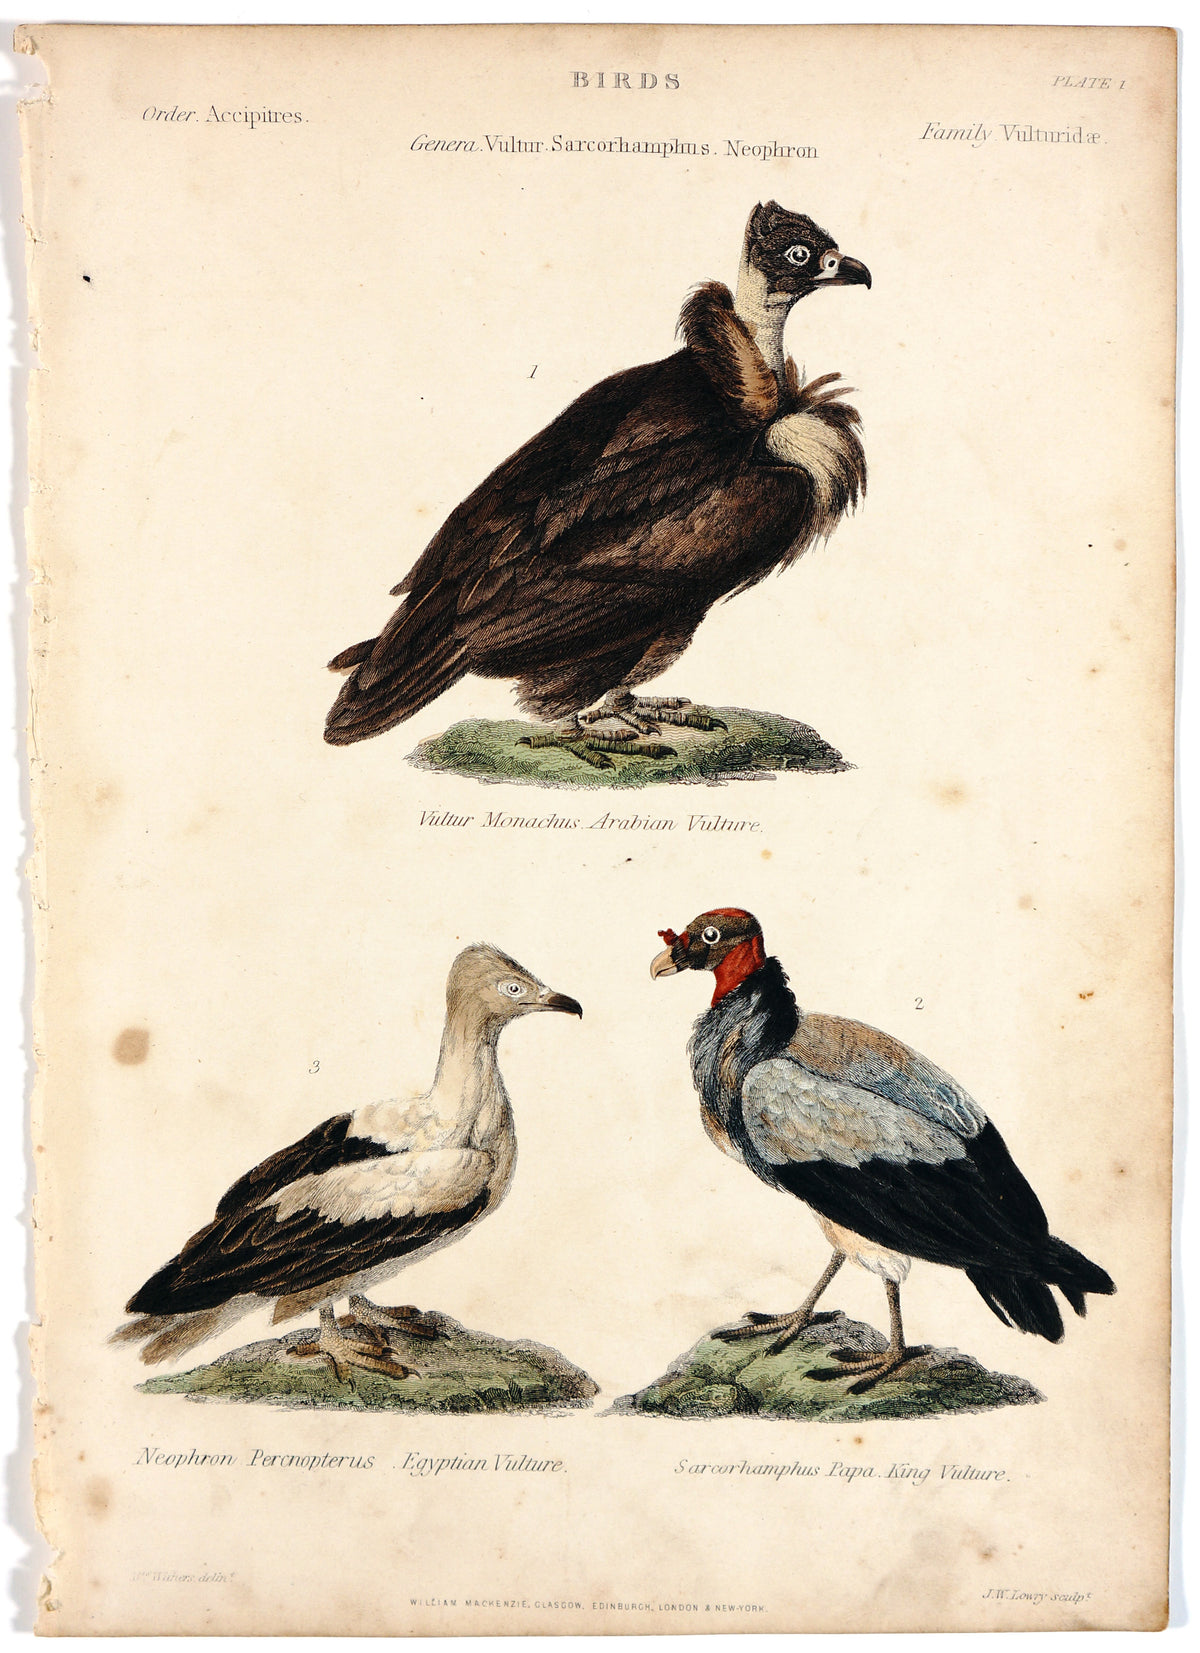 Arabian Vulture Egyptian Vulture King, Hand colored Engraving - Authentic Vintage Antique Print